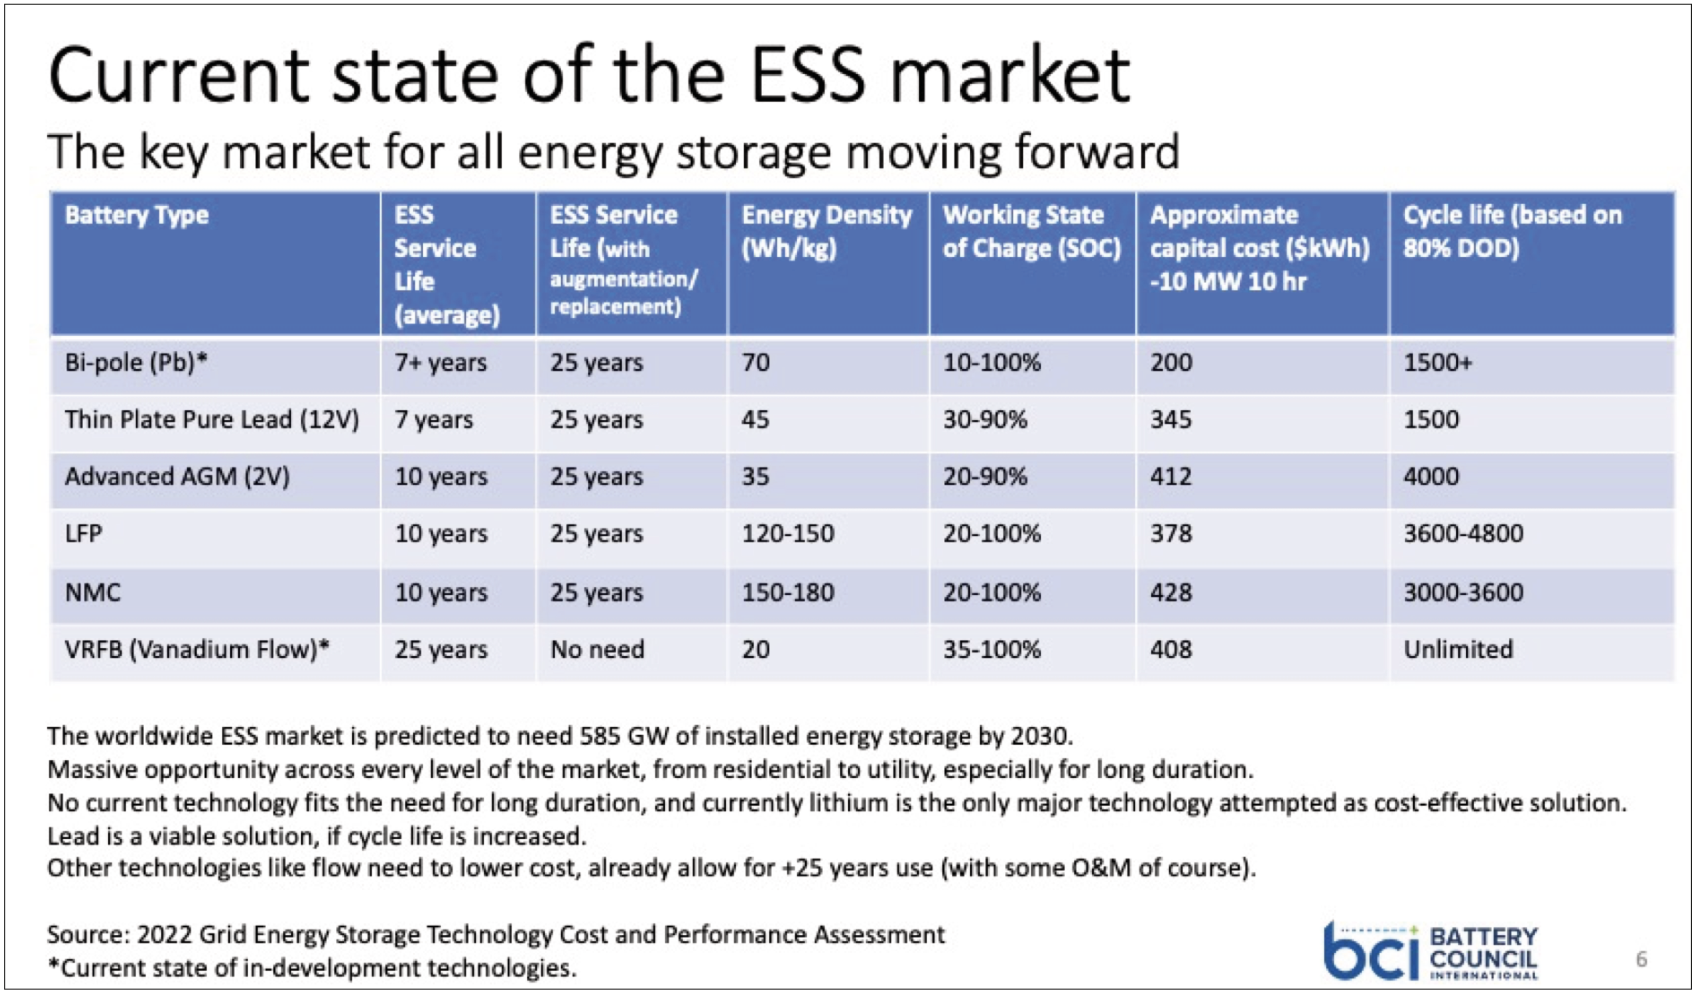 BCI current state of the ESS market